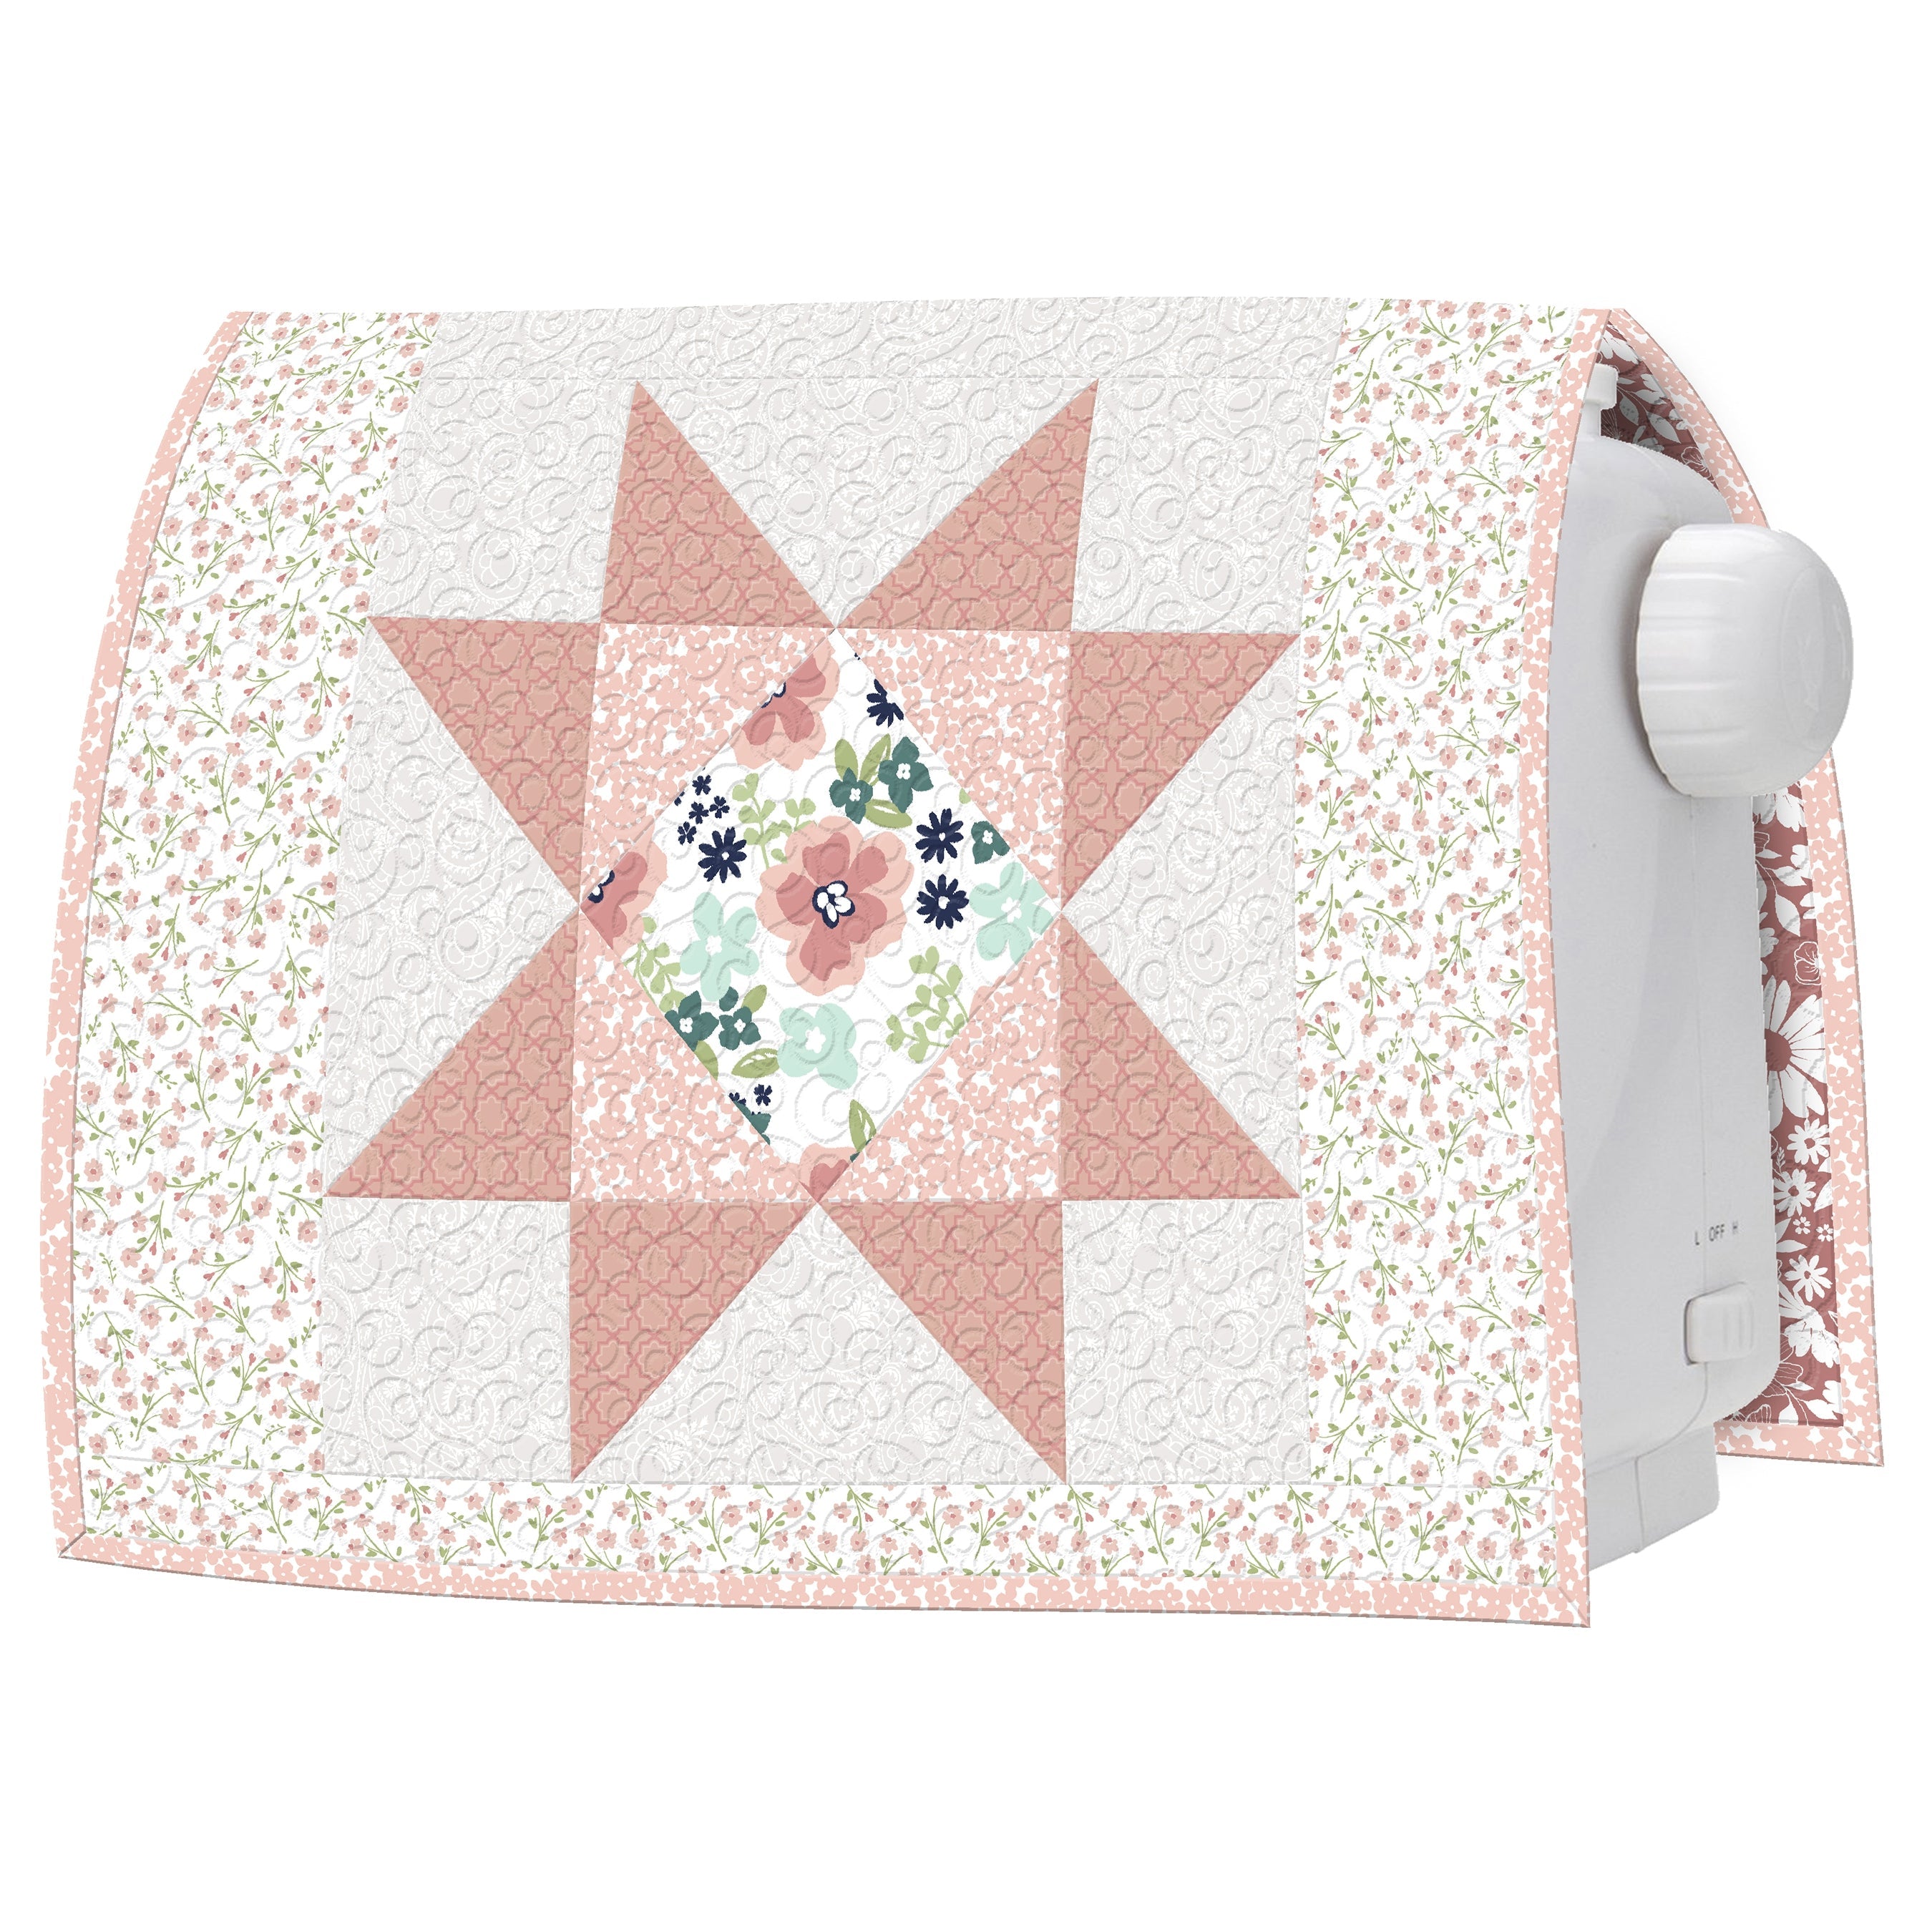 Basic Sewing Machine Cover 3 - Free Digital Download-Wilmington Prints-My Favorite Quilt Store